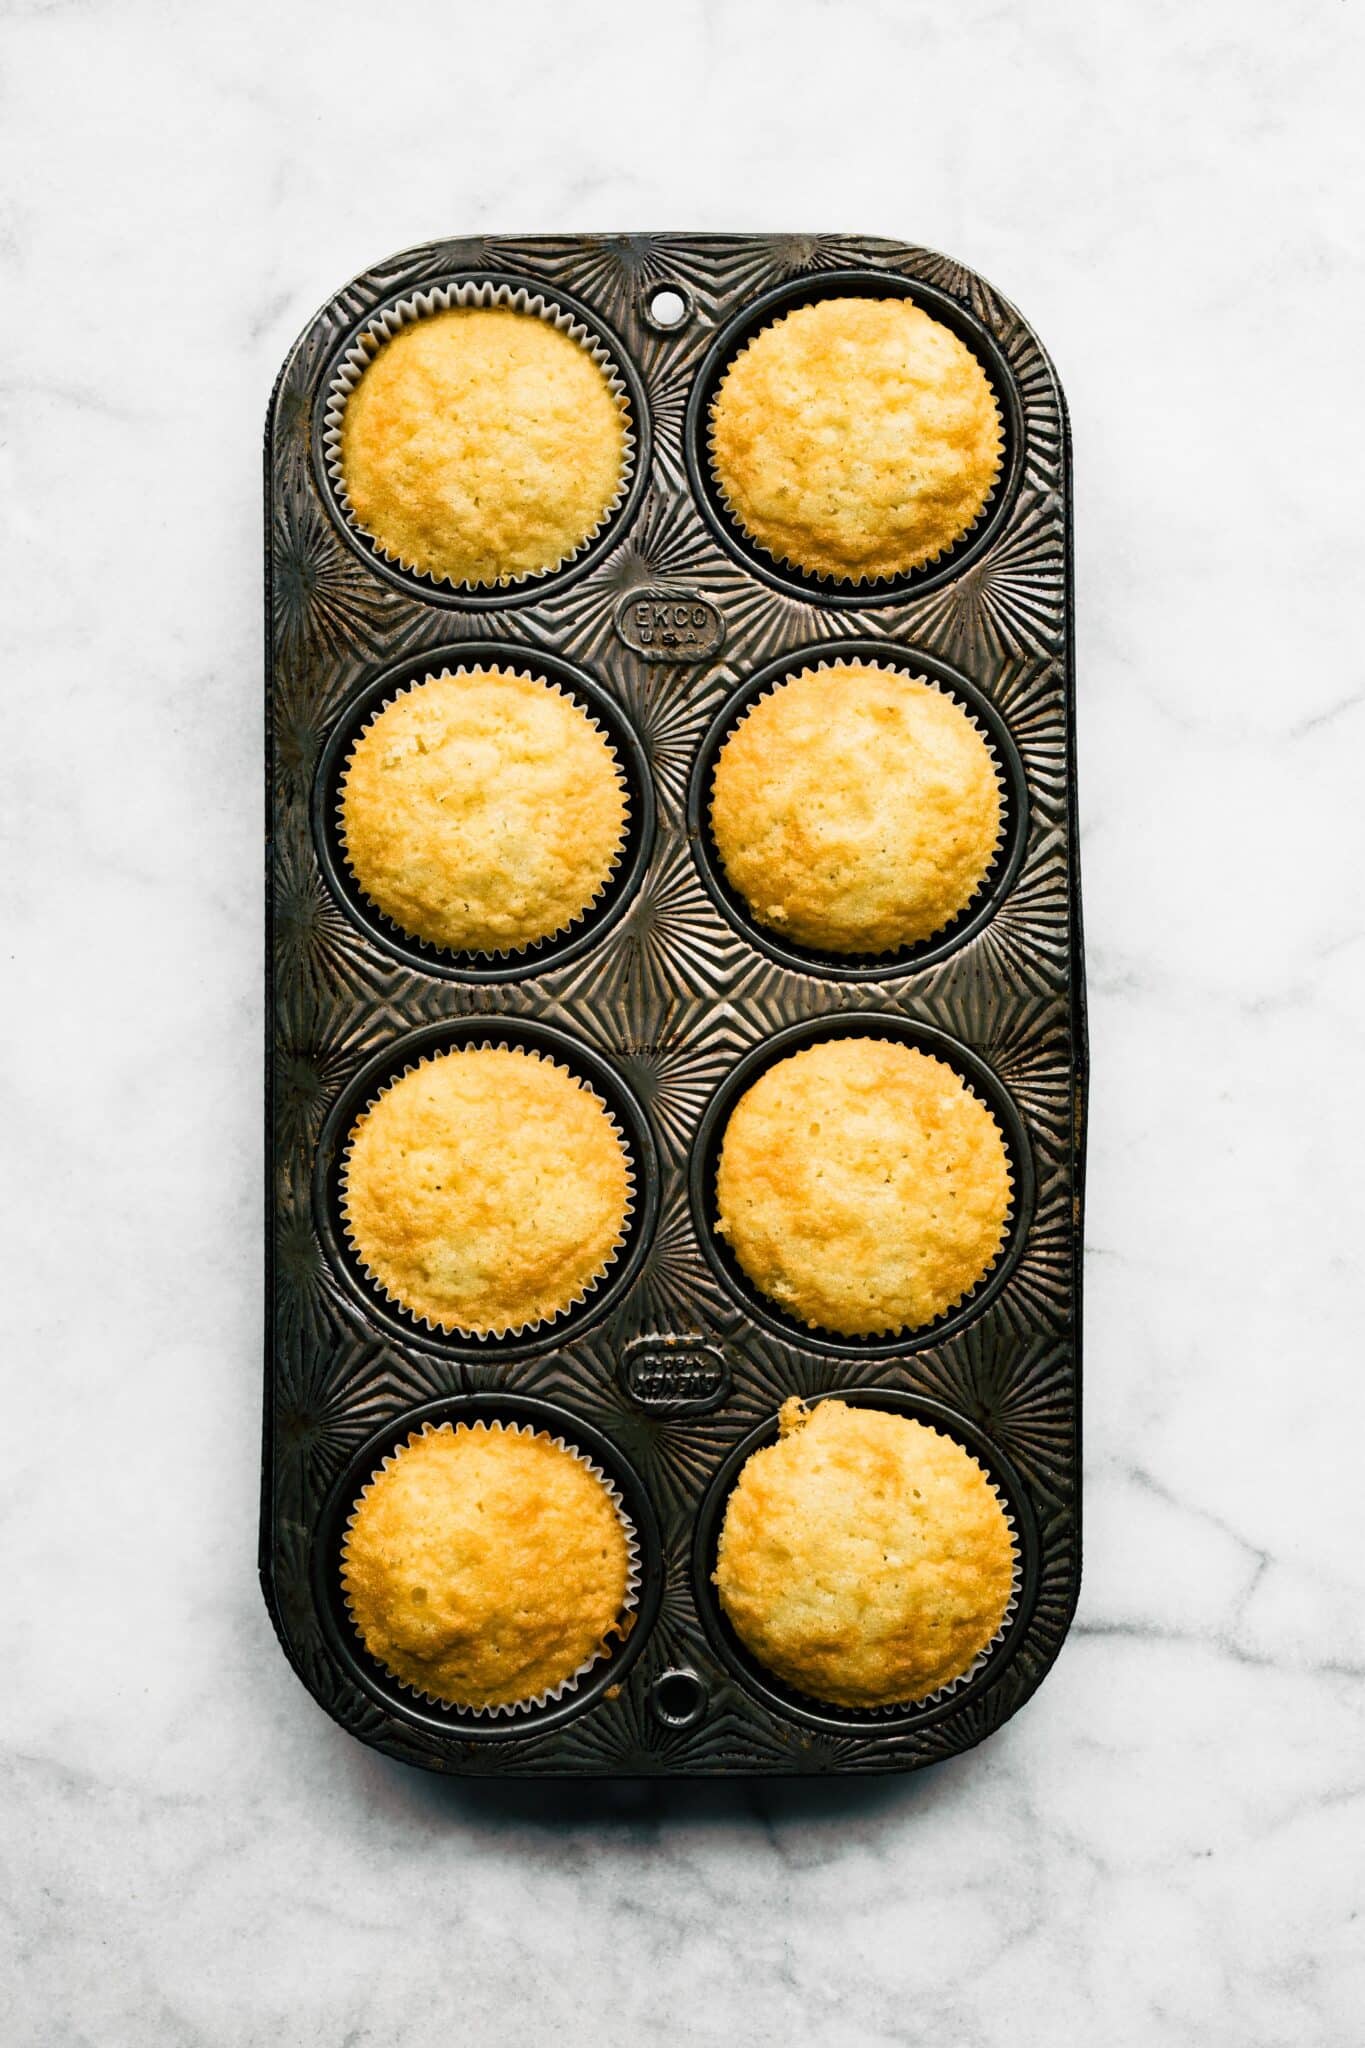 Eight baked gluten free vanilla cupcakes in a vintage muffin pan.